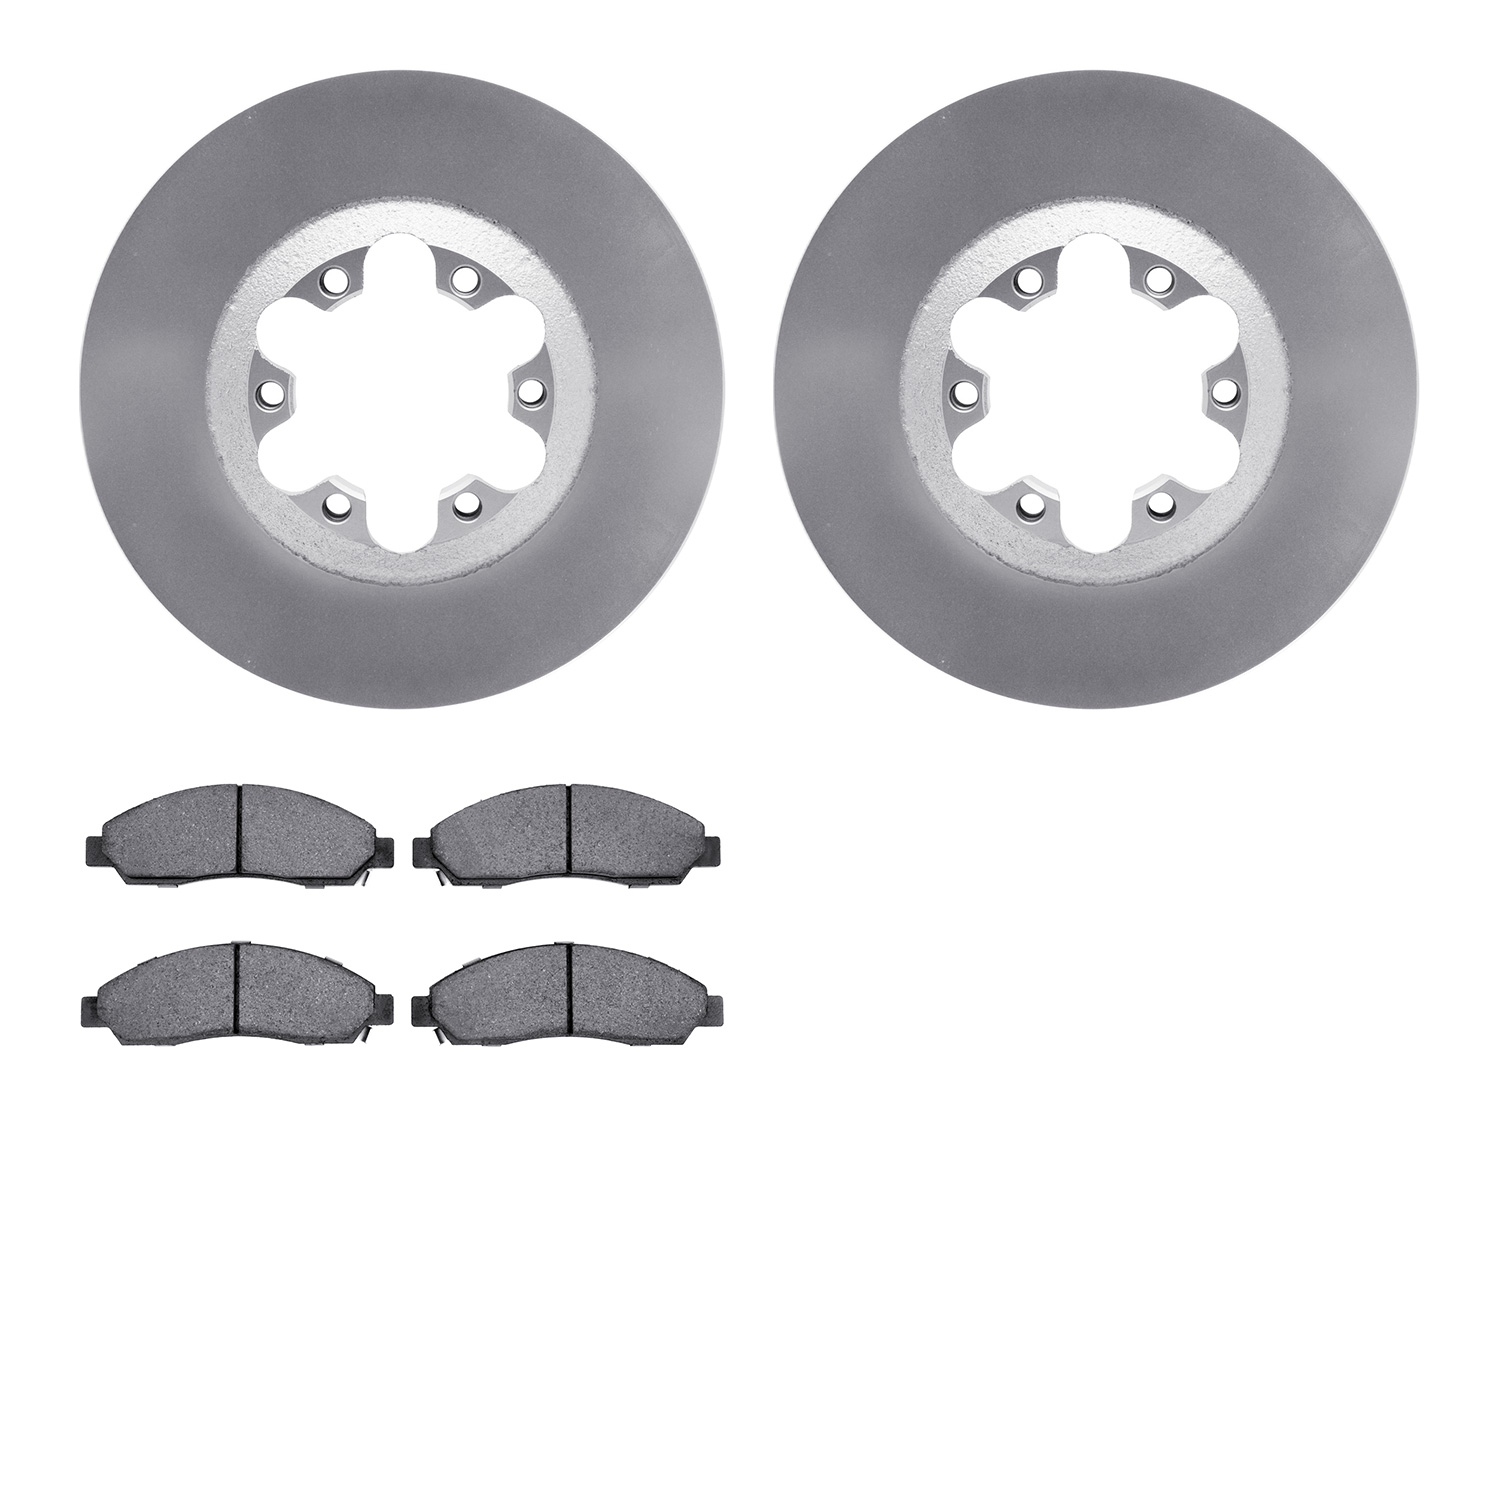 4402-48021 Geospec Brake Rotors with Ultimate-Duty Brake Pads Kit, 2004-2008 GM, Position: Front